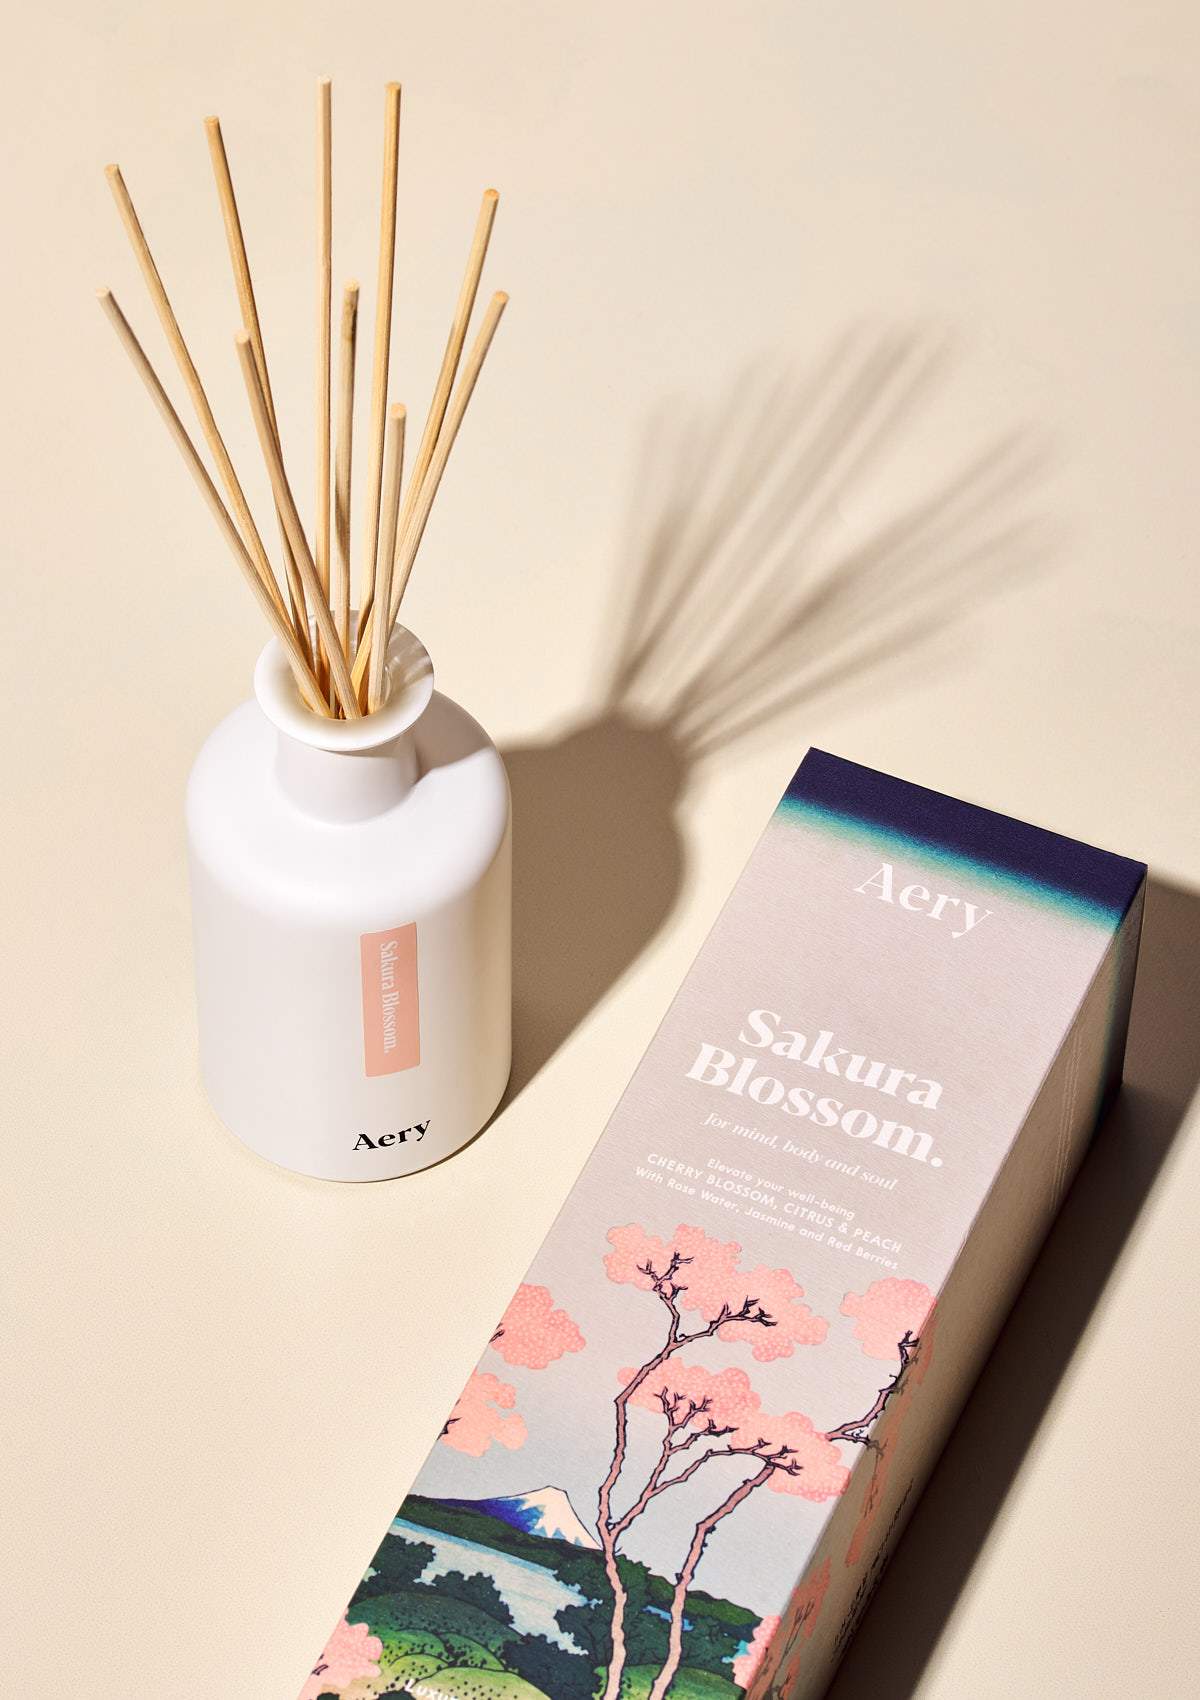 aery living sakura blossom reed diffuser next to illustrative product packaging on a cream background